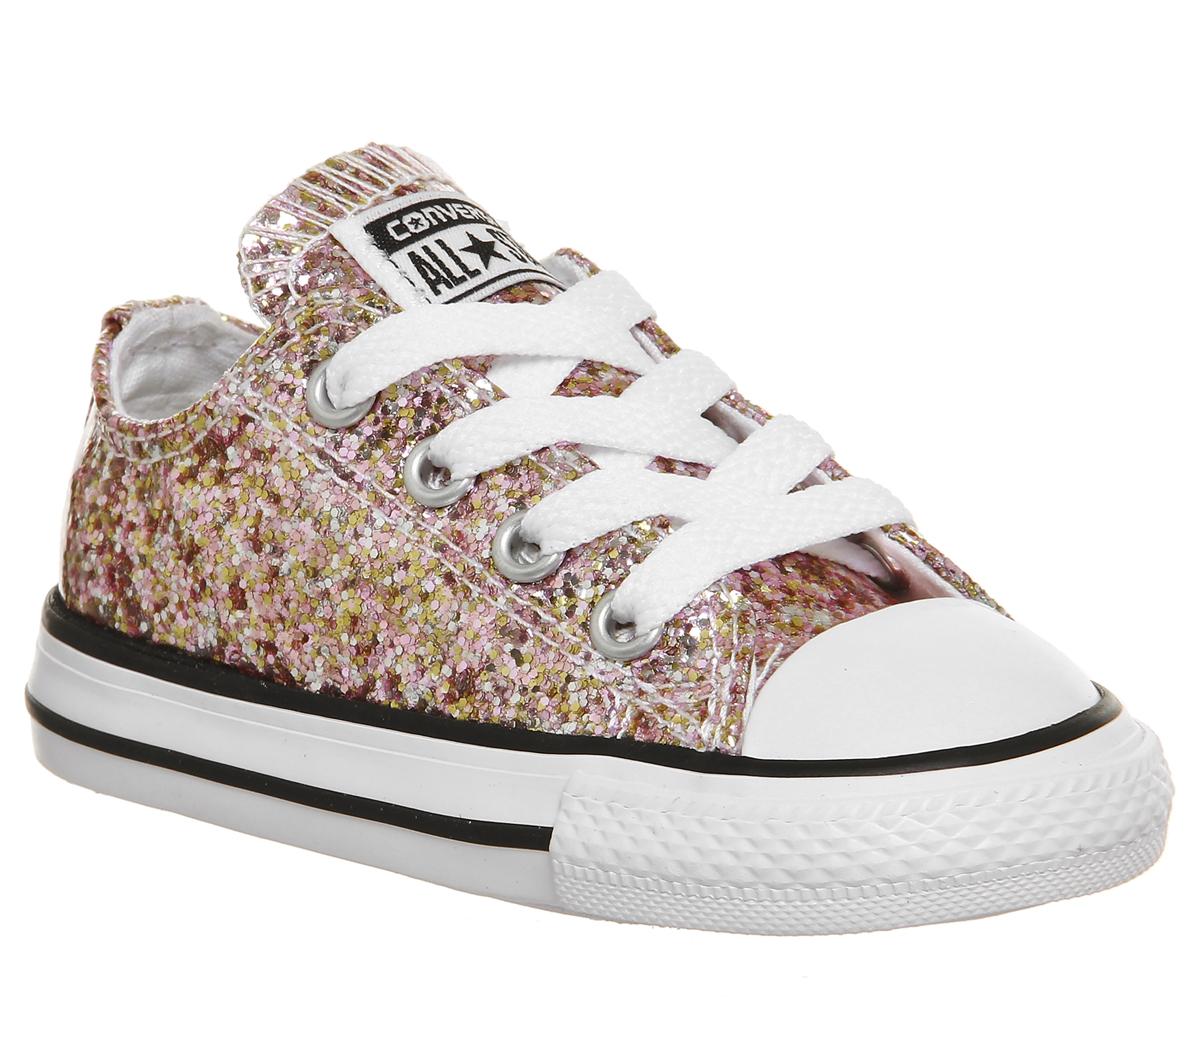 converse all star low gold glitter exclusive